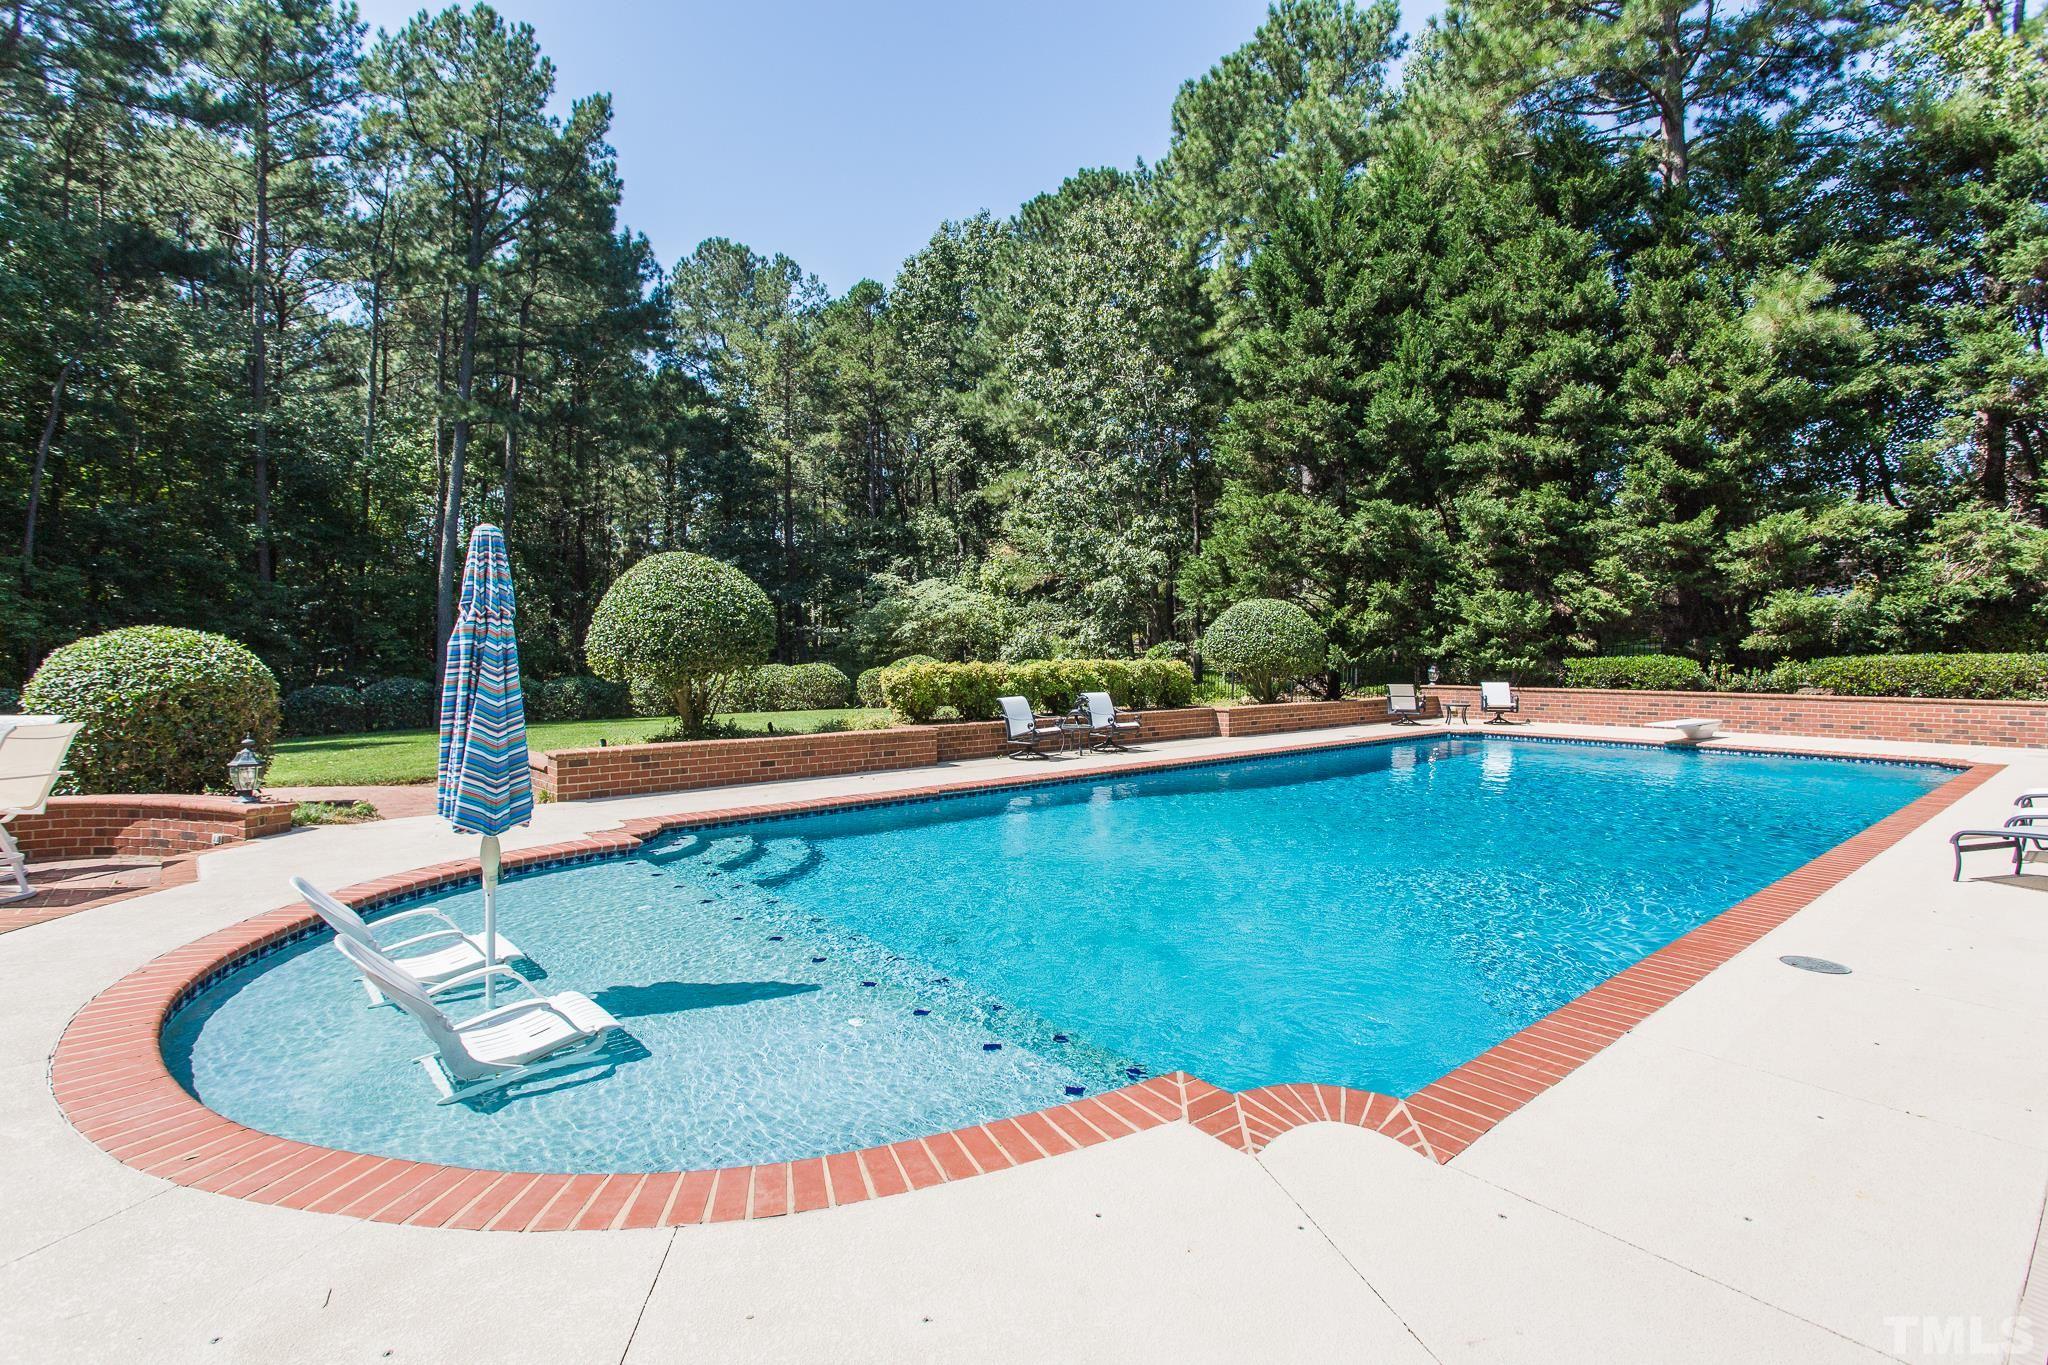 In-ground 60 ft x 22 ft, 9 foot deep,  saltwater pool installed in 2006 by Oasis Pools and offers a diving board and tanning shelf with water feature surrounded by large brick patio with Firepit